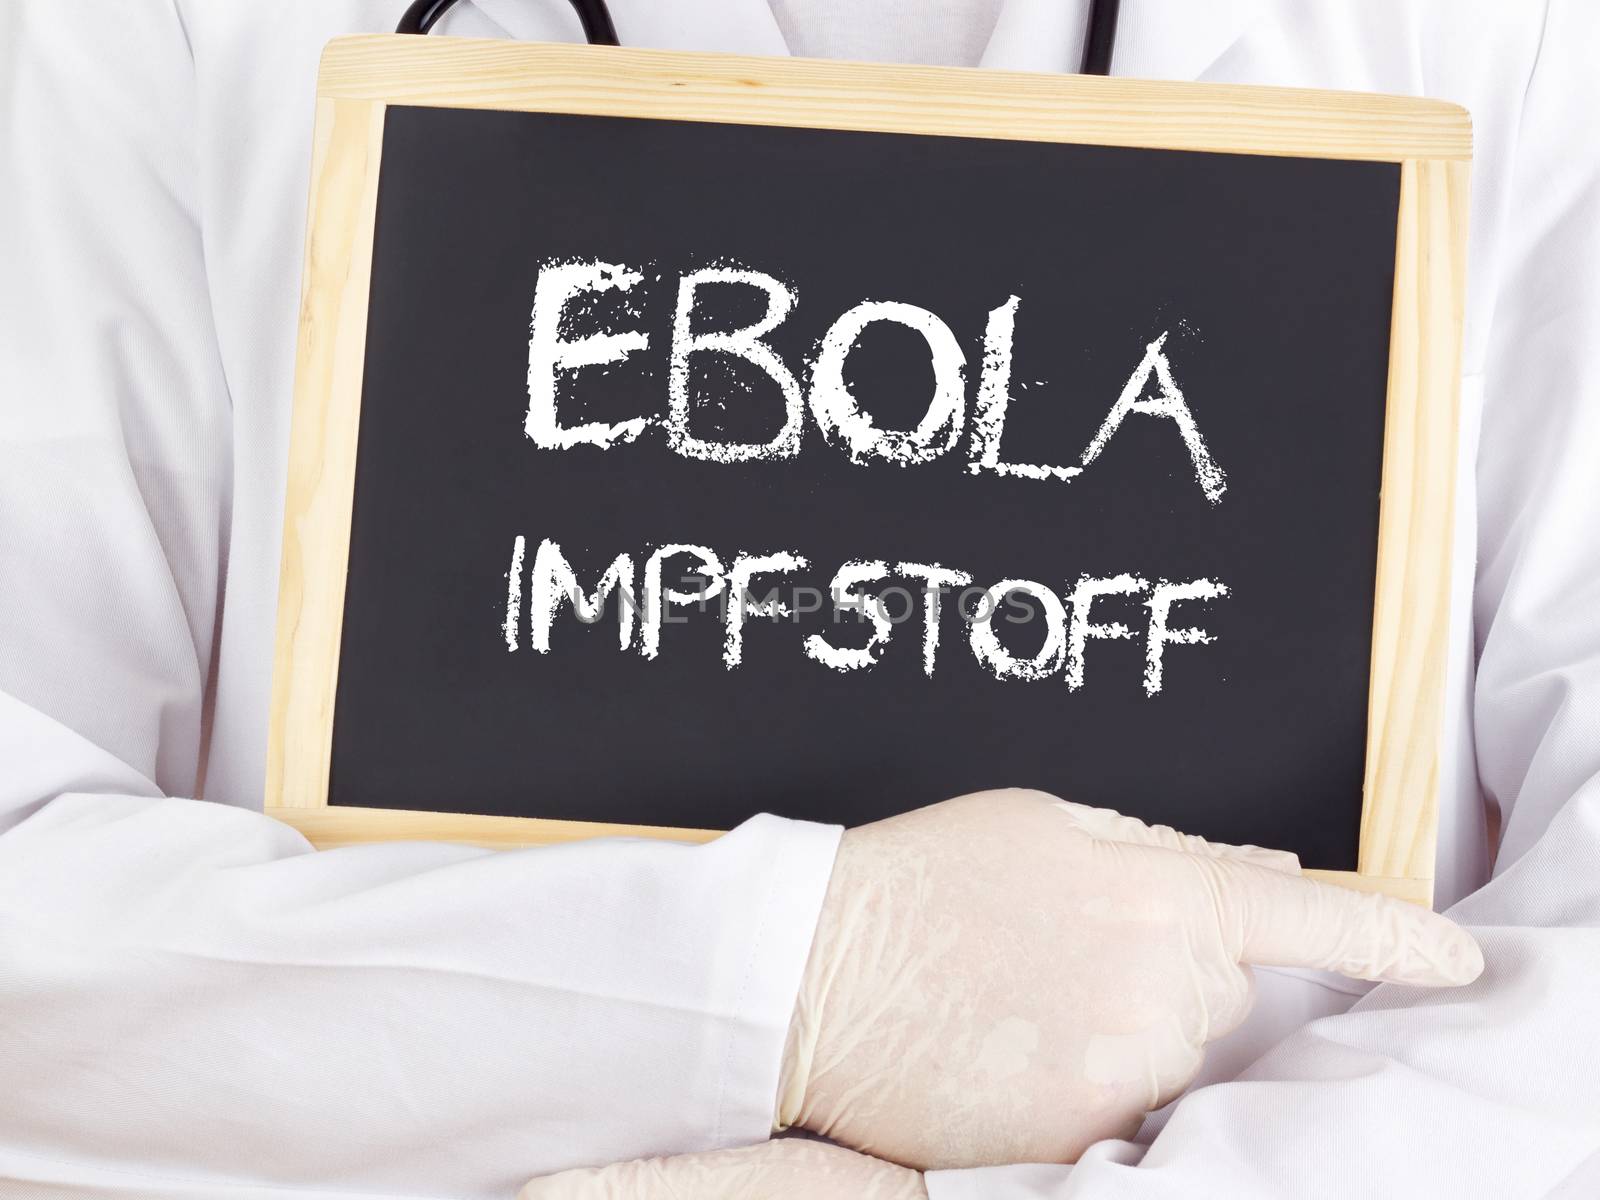 Doctor shows information: Ebola serum in german language by gwolters